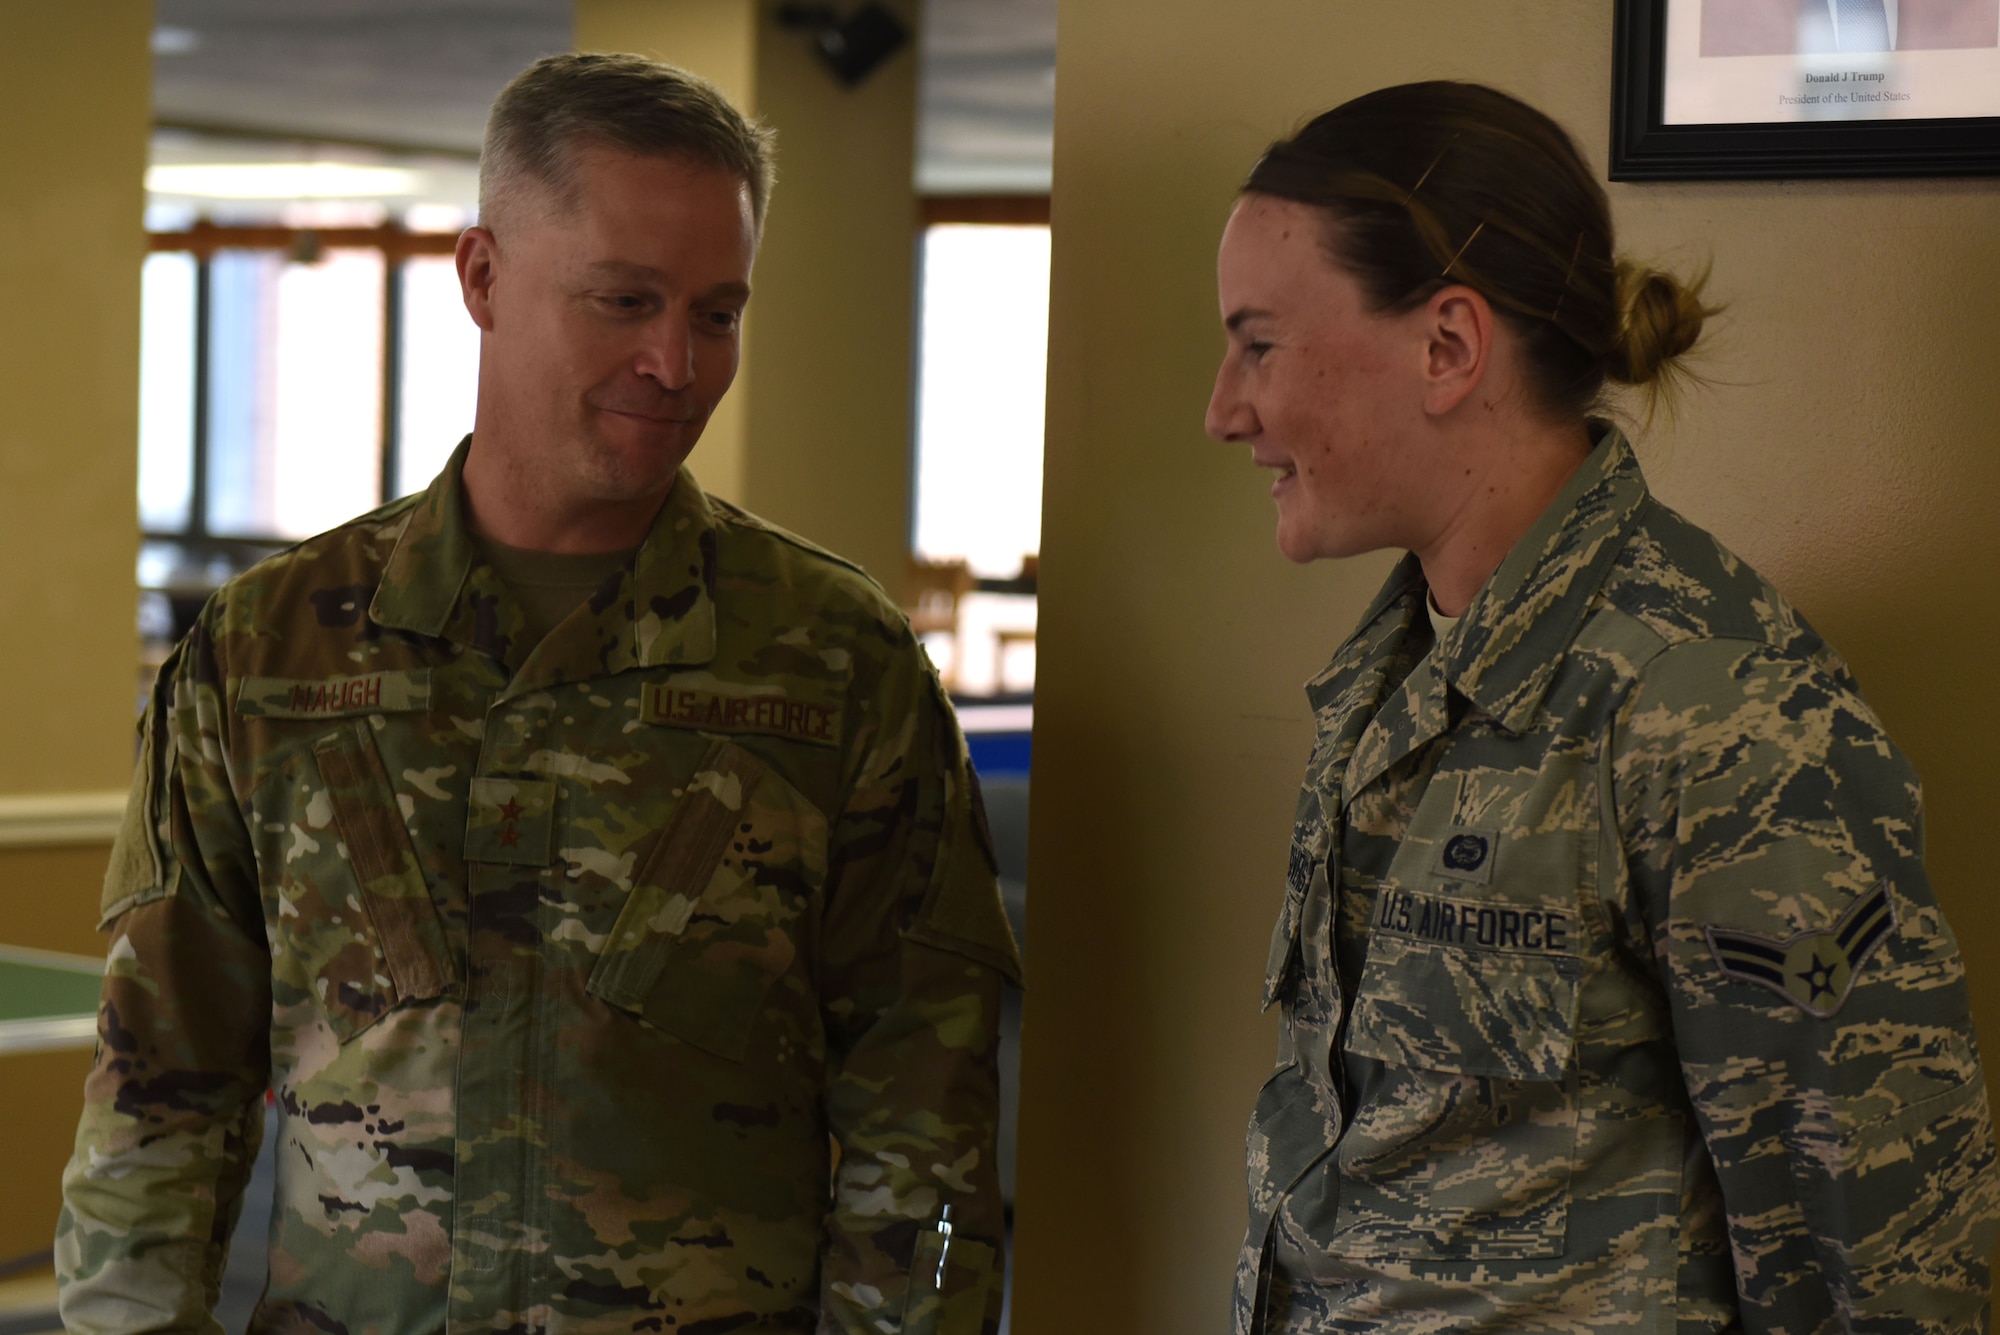 U.S. Air Force Maj. Gen. Timothy Haugh, Twenty-Fifth Air Force commander, speaks with Airman 1st Class Kylie, 32nd Intelligence Squadron, about dormitory conditions and quality of life for 70th Intelligence, Surveillance and Reconnaissance Wing Airmen at Fort George G. Meade, Maryland, Sept. 9, 2019. Haugh recently took command of Twenty-Fifth Air Force, and is visiting various wings during a unit familiarization and wellness tour. (U.S. Air Force photo by Senior Airman Gerald R. Willis)